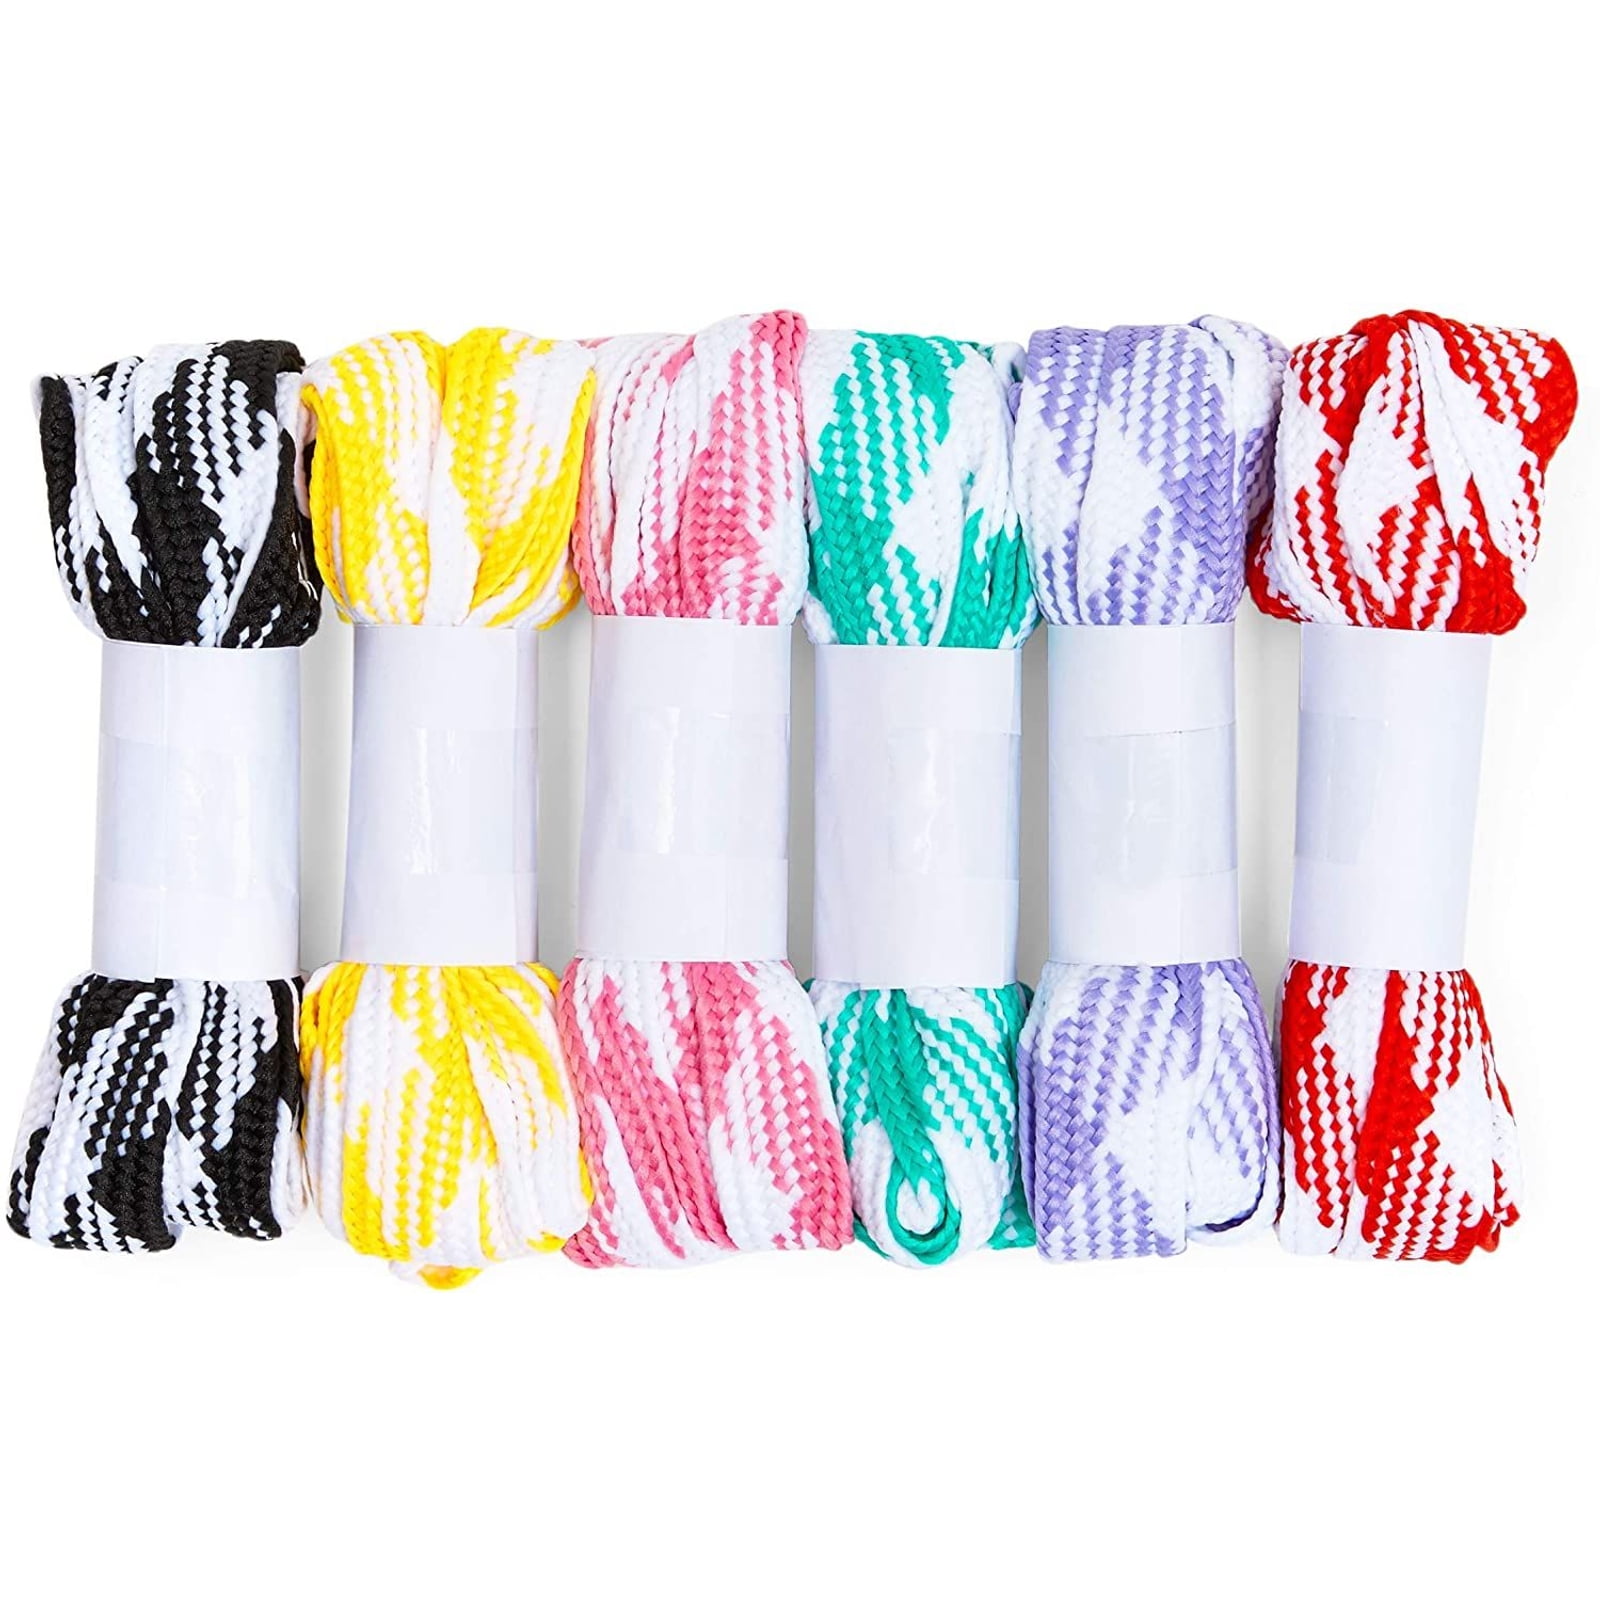 Flat Colorful Replacement Shoelaces 40 Colors NEW Laces BUY 2 GET 1 FREE 